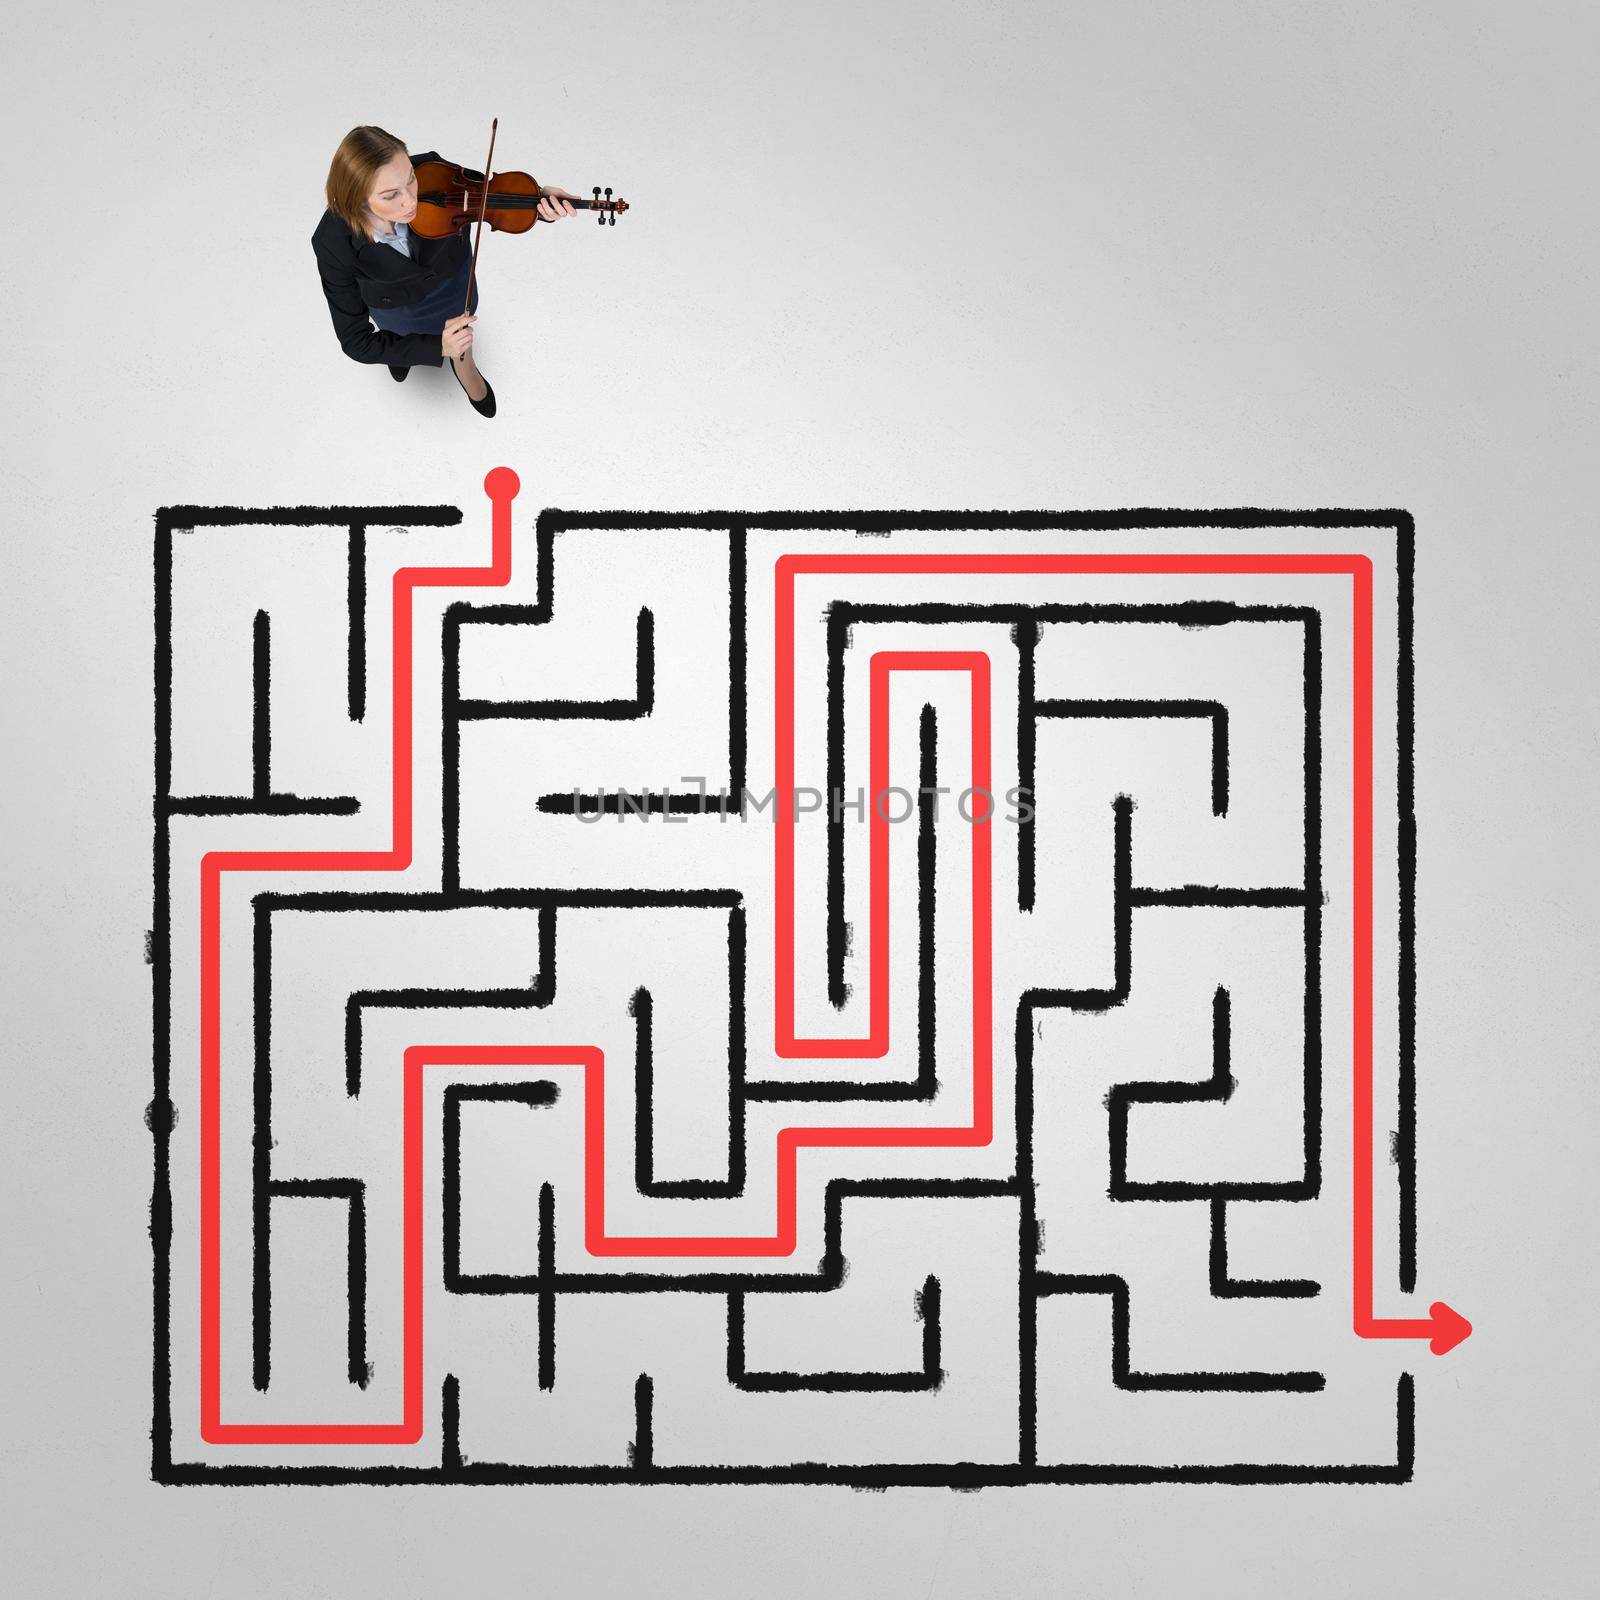 Top view of businesswoman playing violin and drawn labyrinth on floor